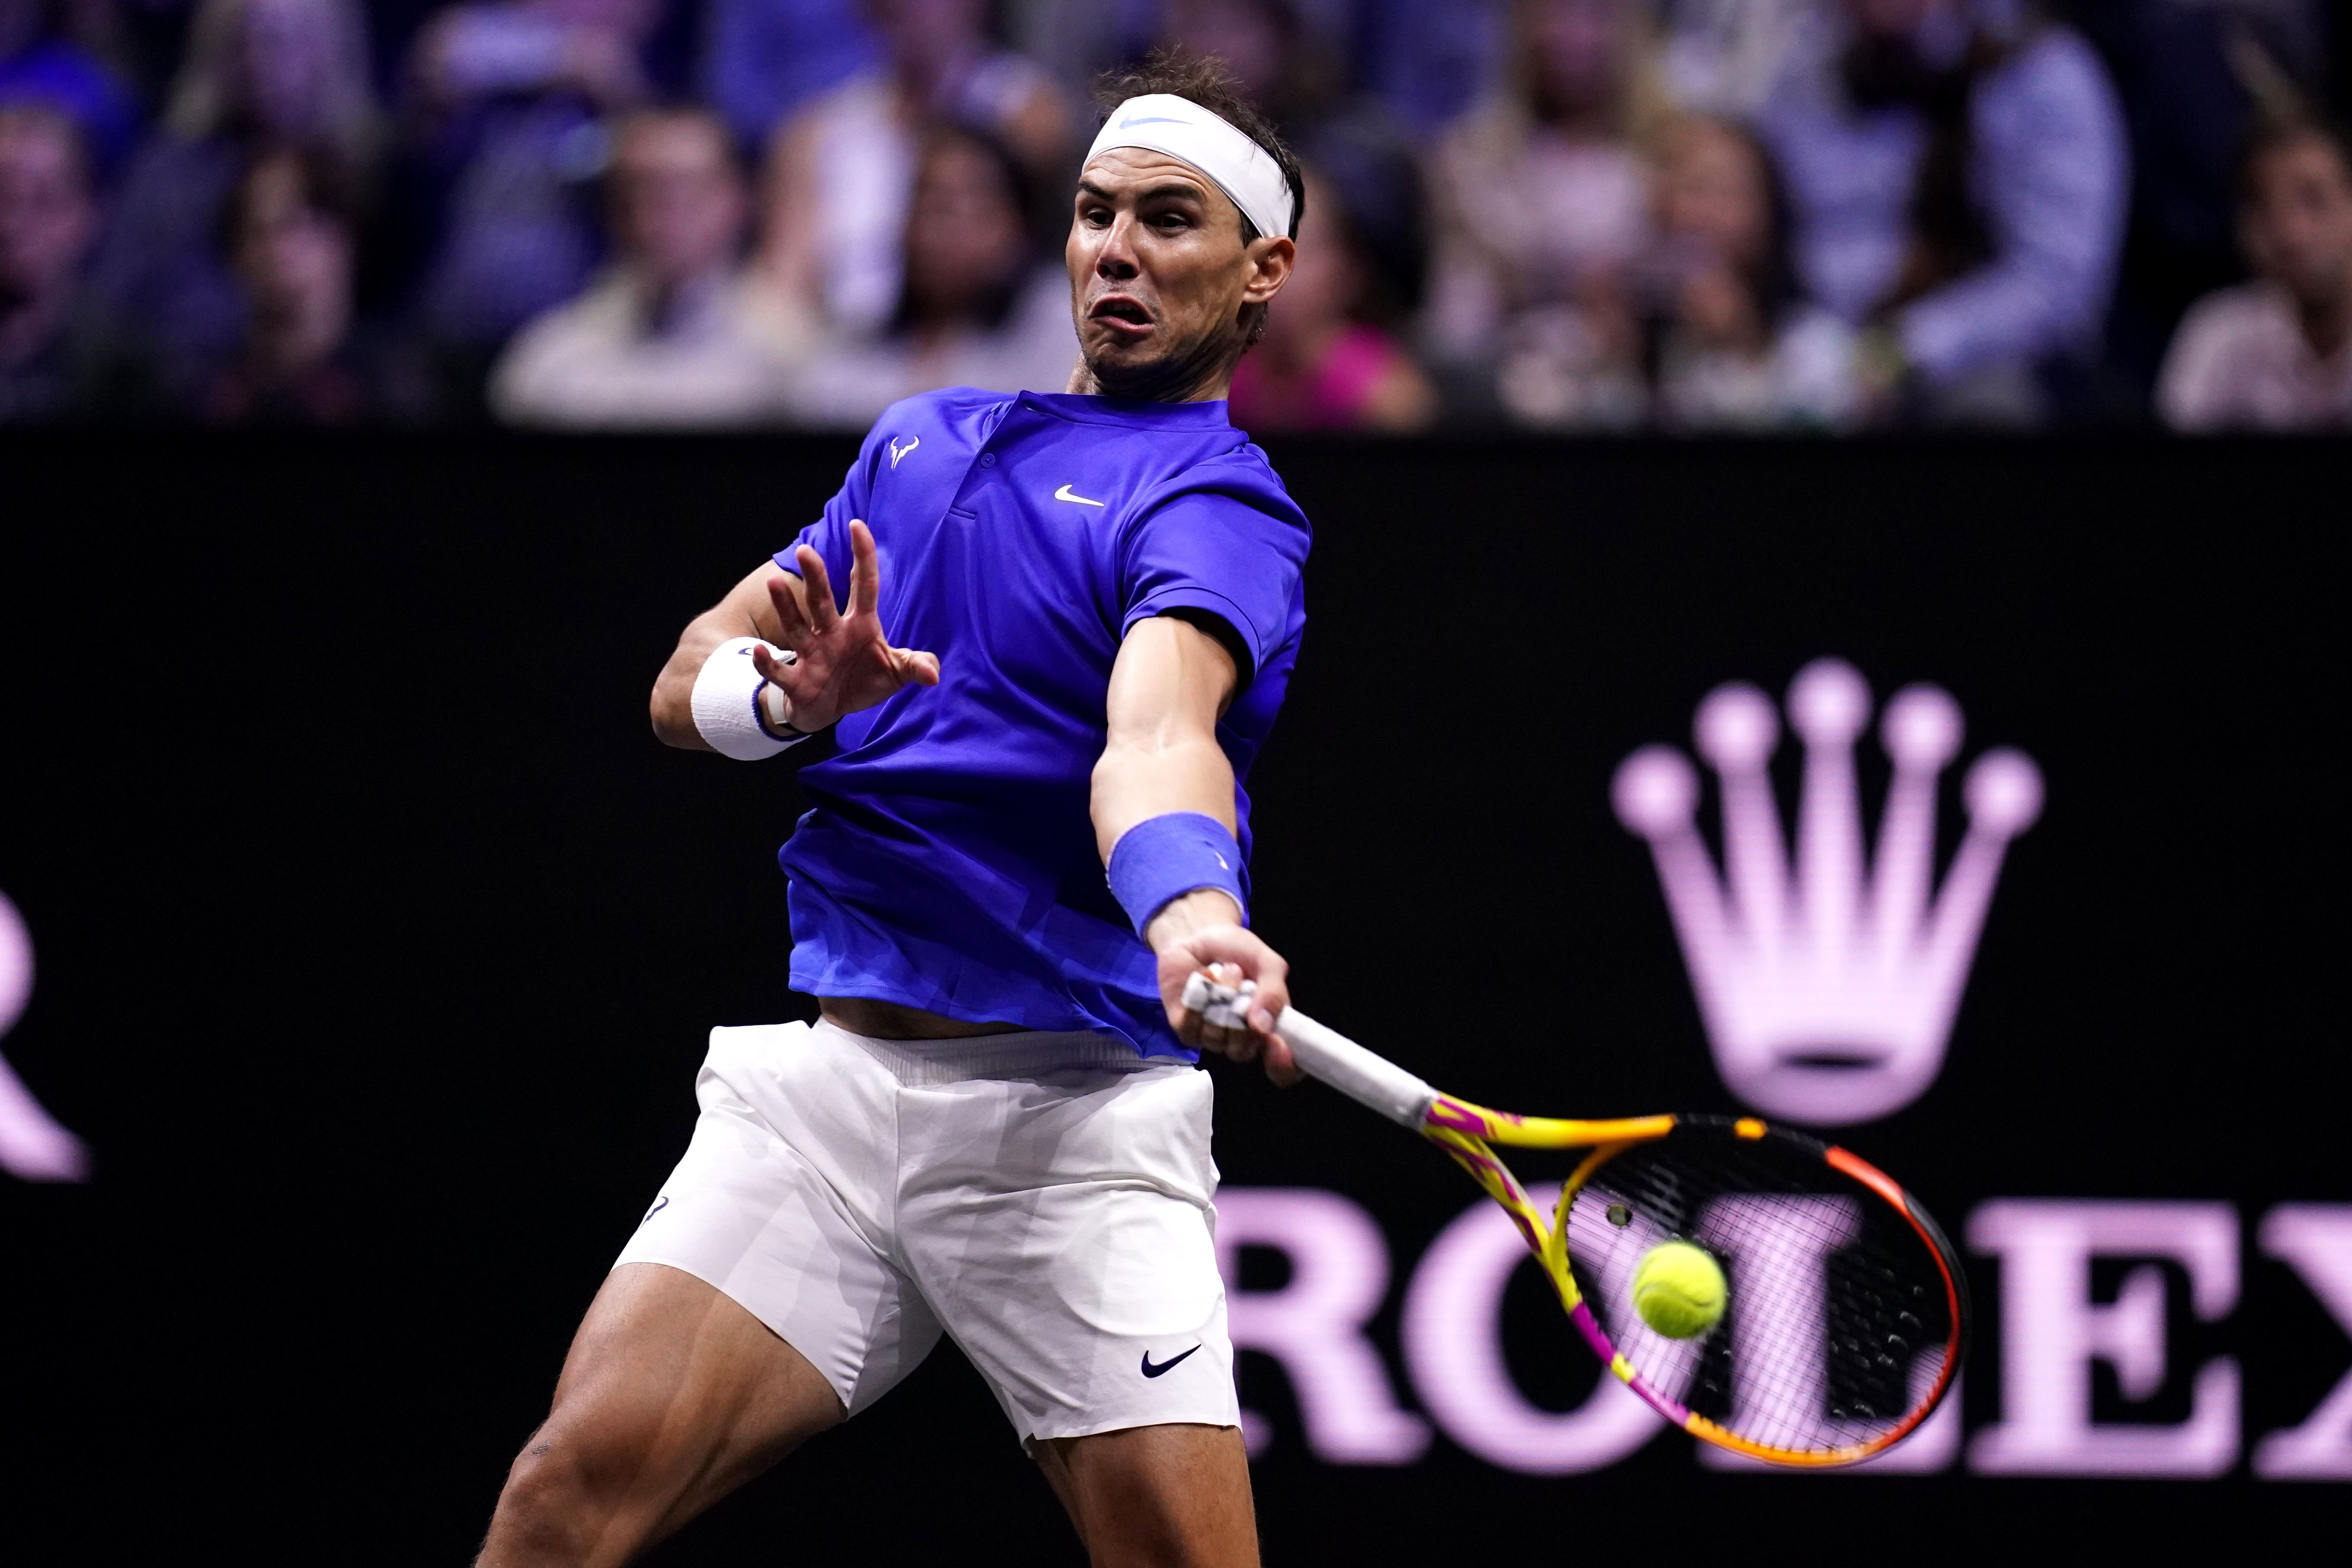 Rafael Nadal has struggled with injury over the last couple of years